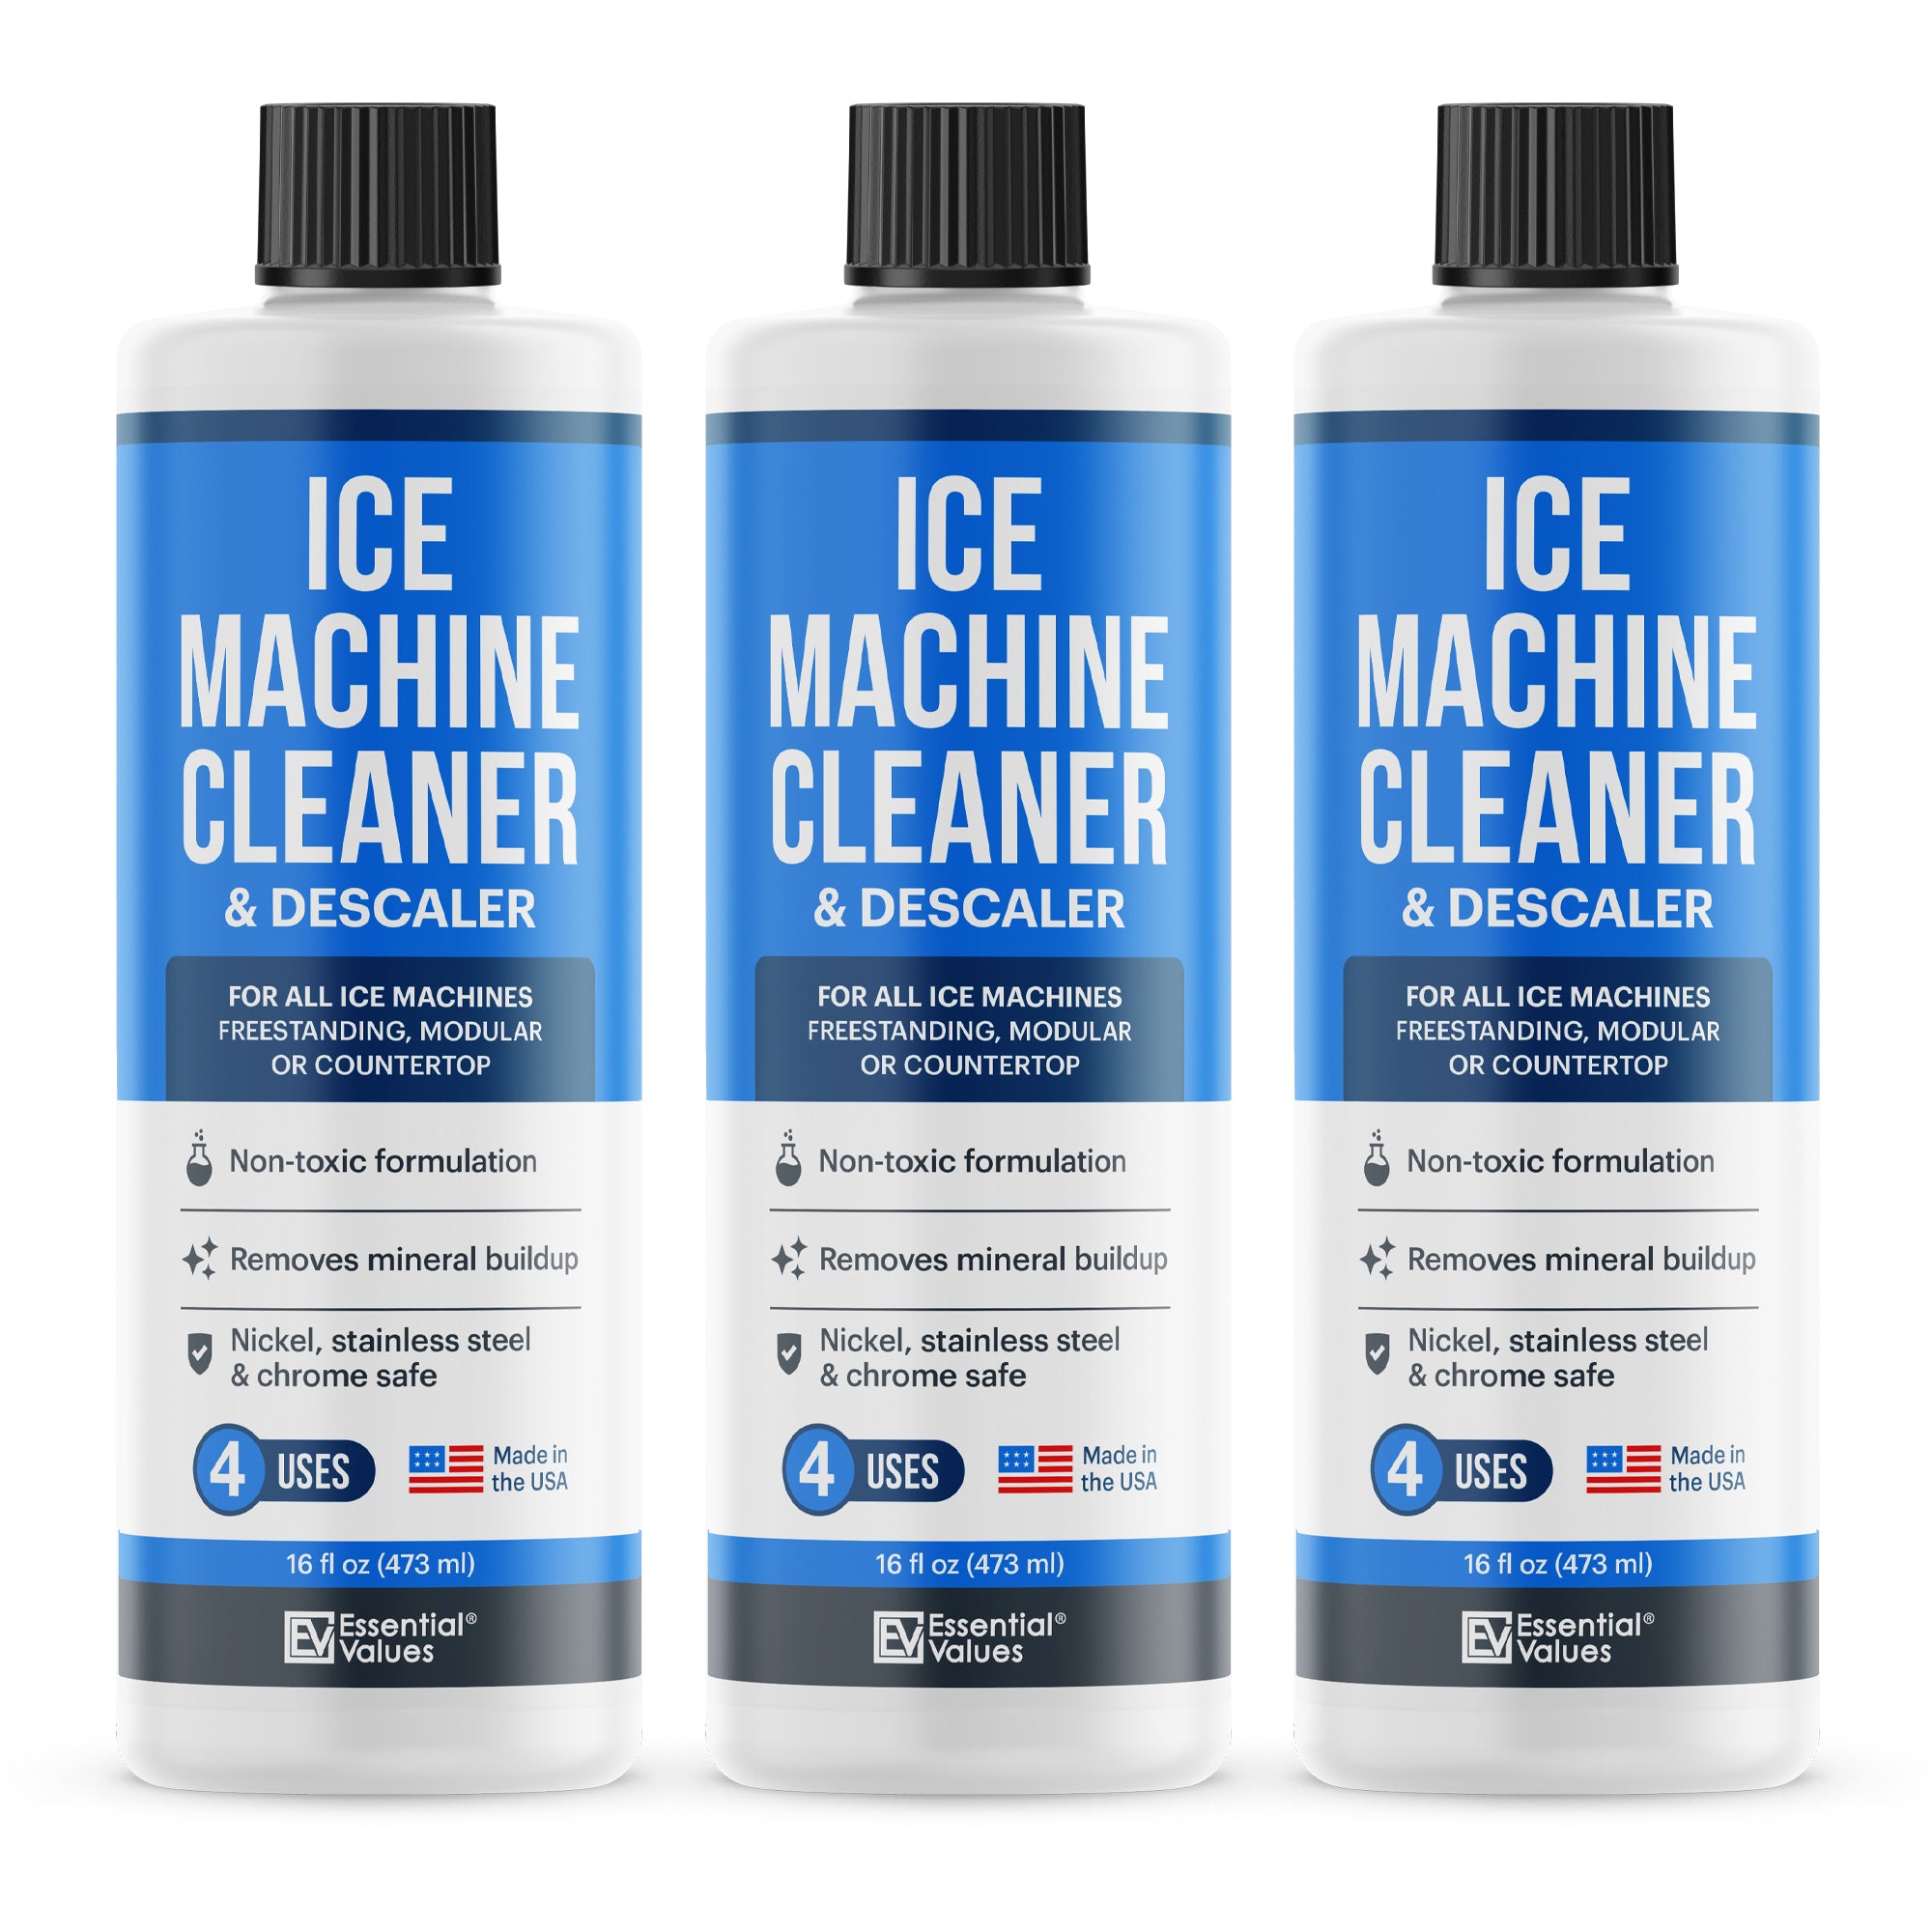 IMPRESA Products Ice Machine Cleaner/Descaler - 4 Uses Per Bottle - Made in  USA - Works on Scotsman, Manitowoc and Virtually All Other Brands (Ice